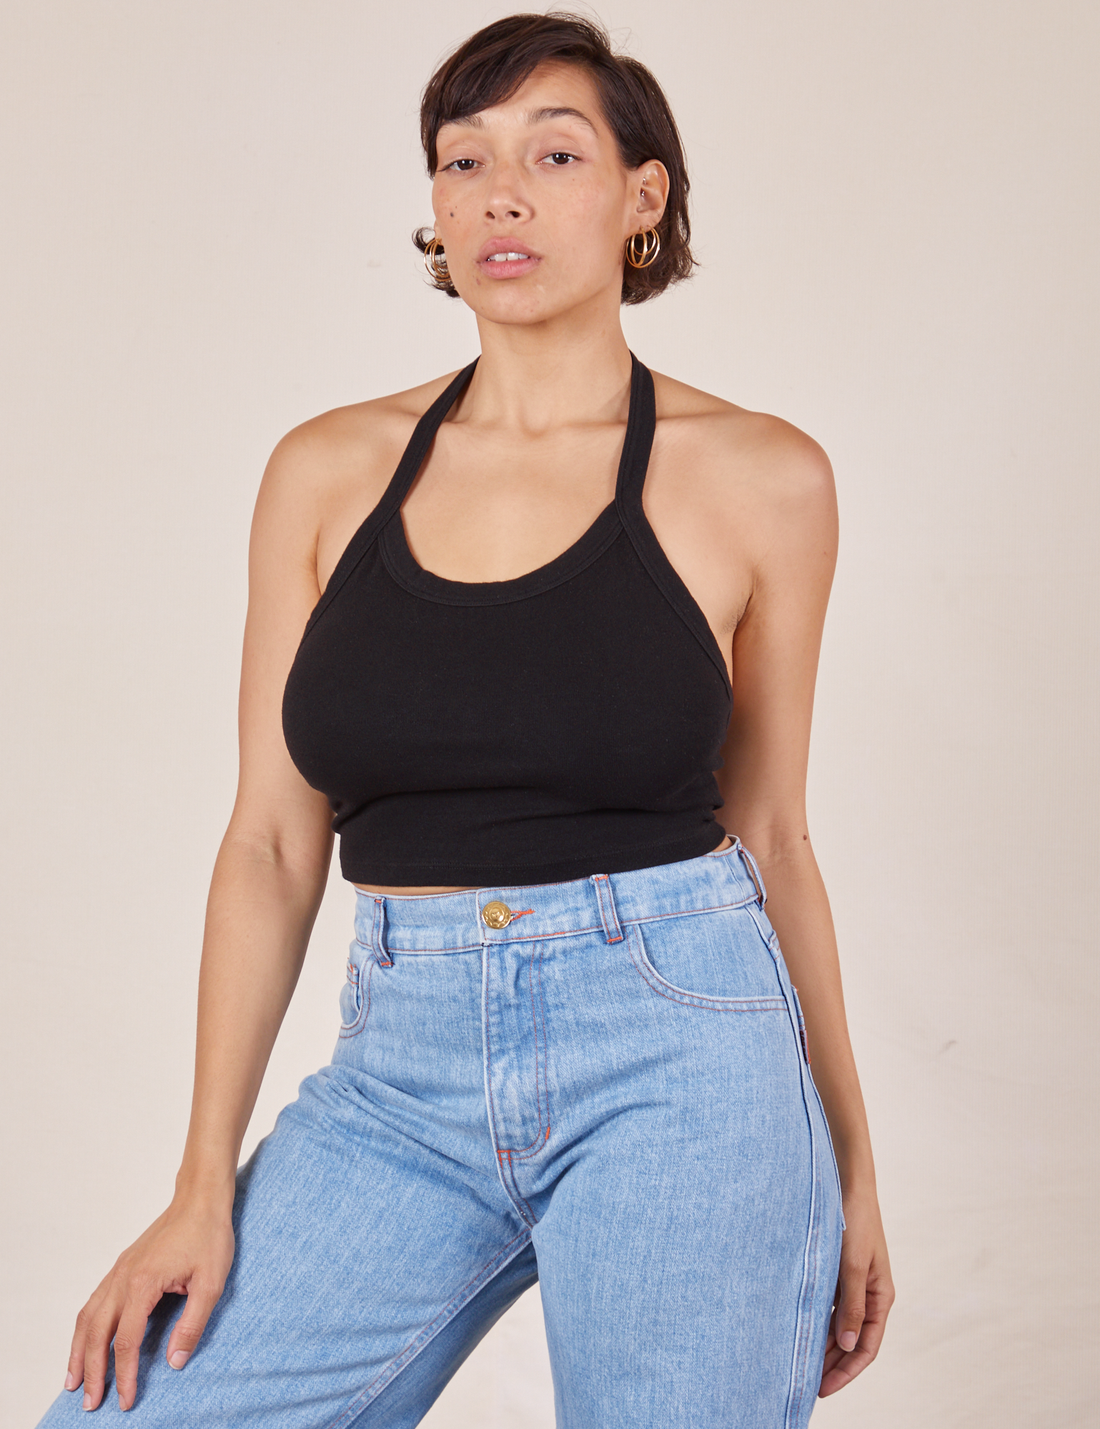 Tiara is 5'4" and wearing XS Halter Top in Basic Black paired with light wash Sailor Jeans